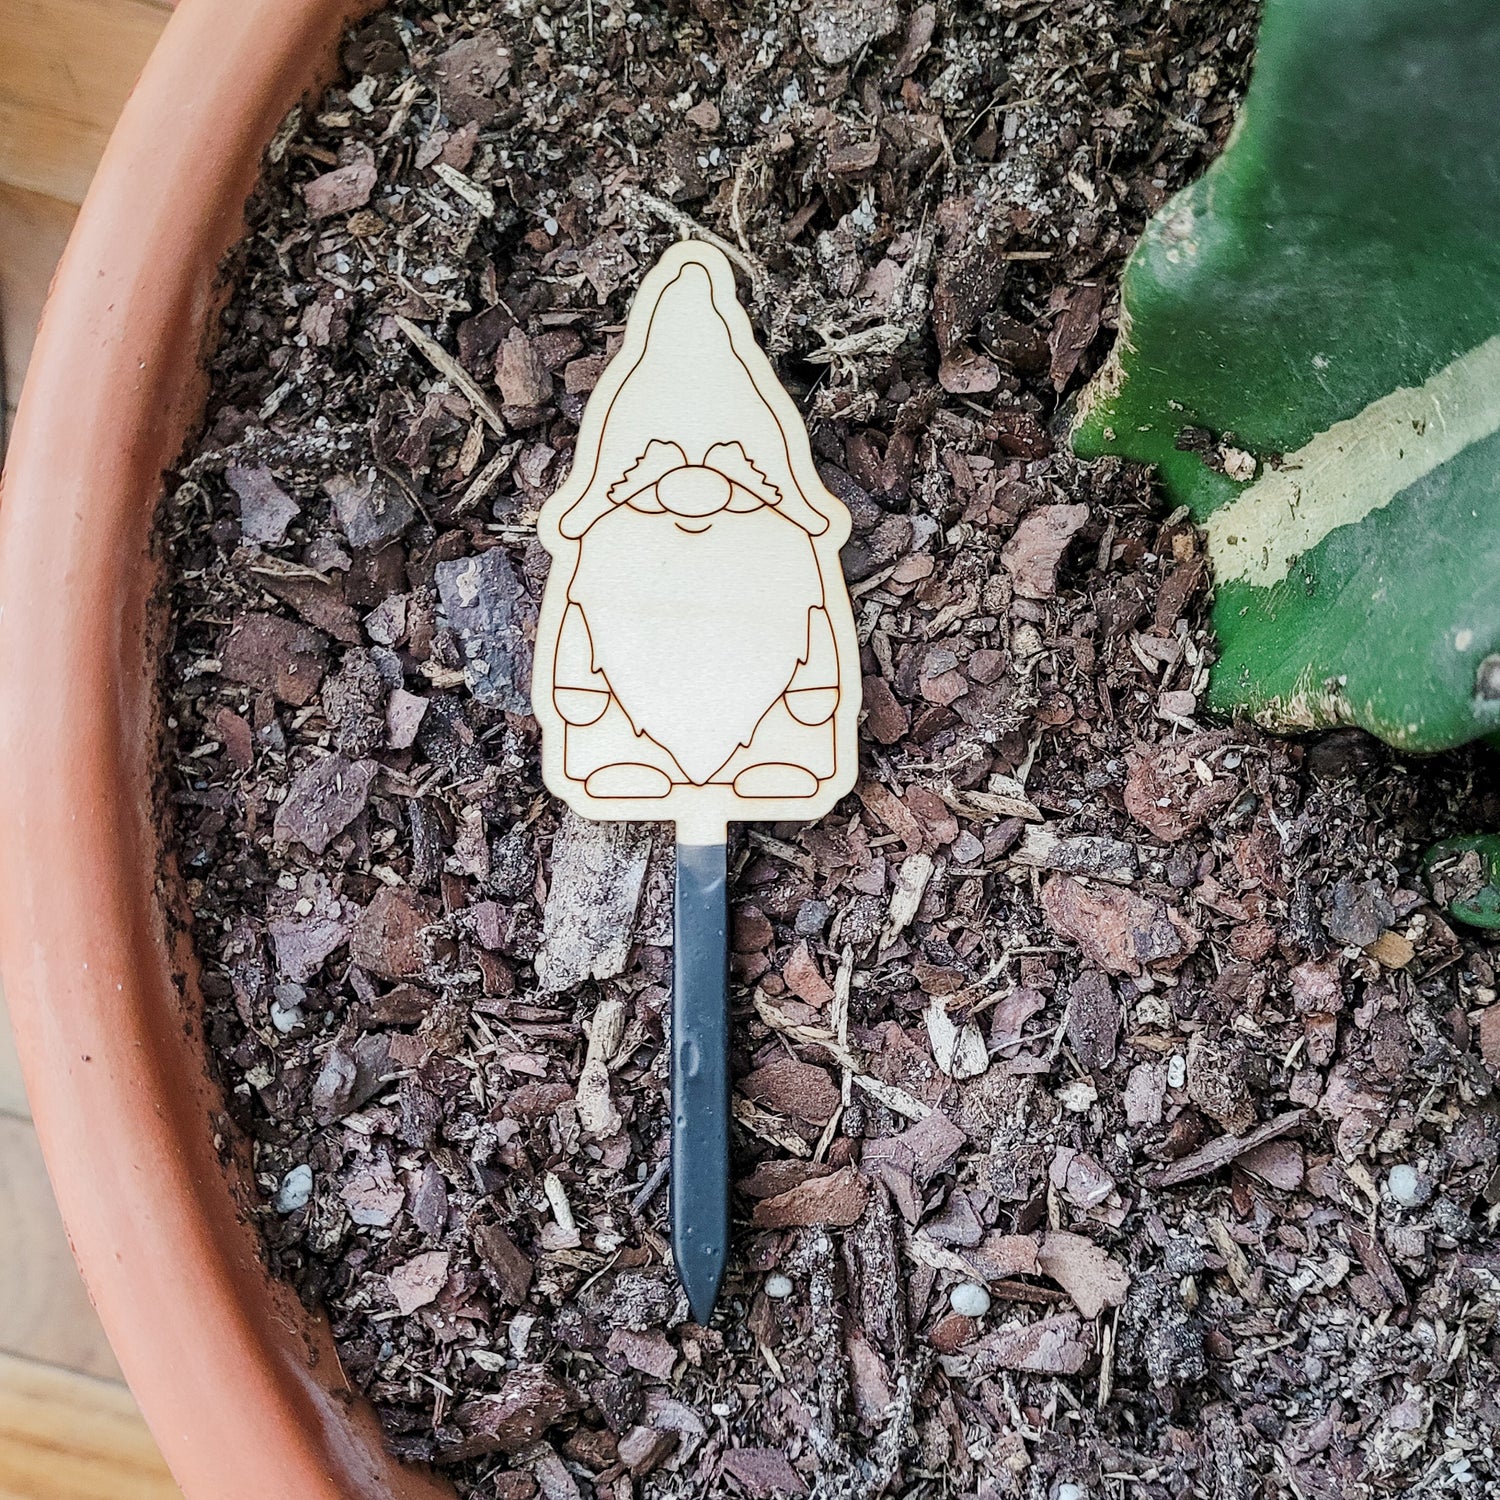 Single gnome decorative plant stake laying on top of the soil in a clay pot containing a cactus.